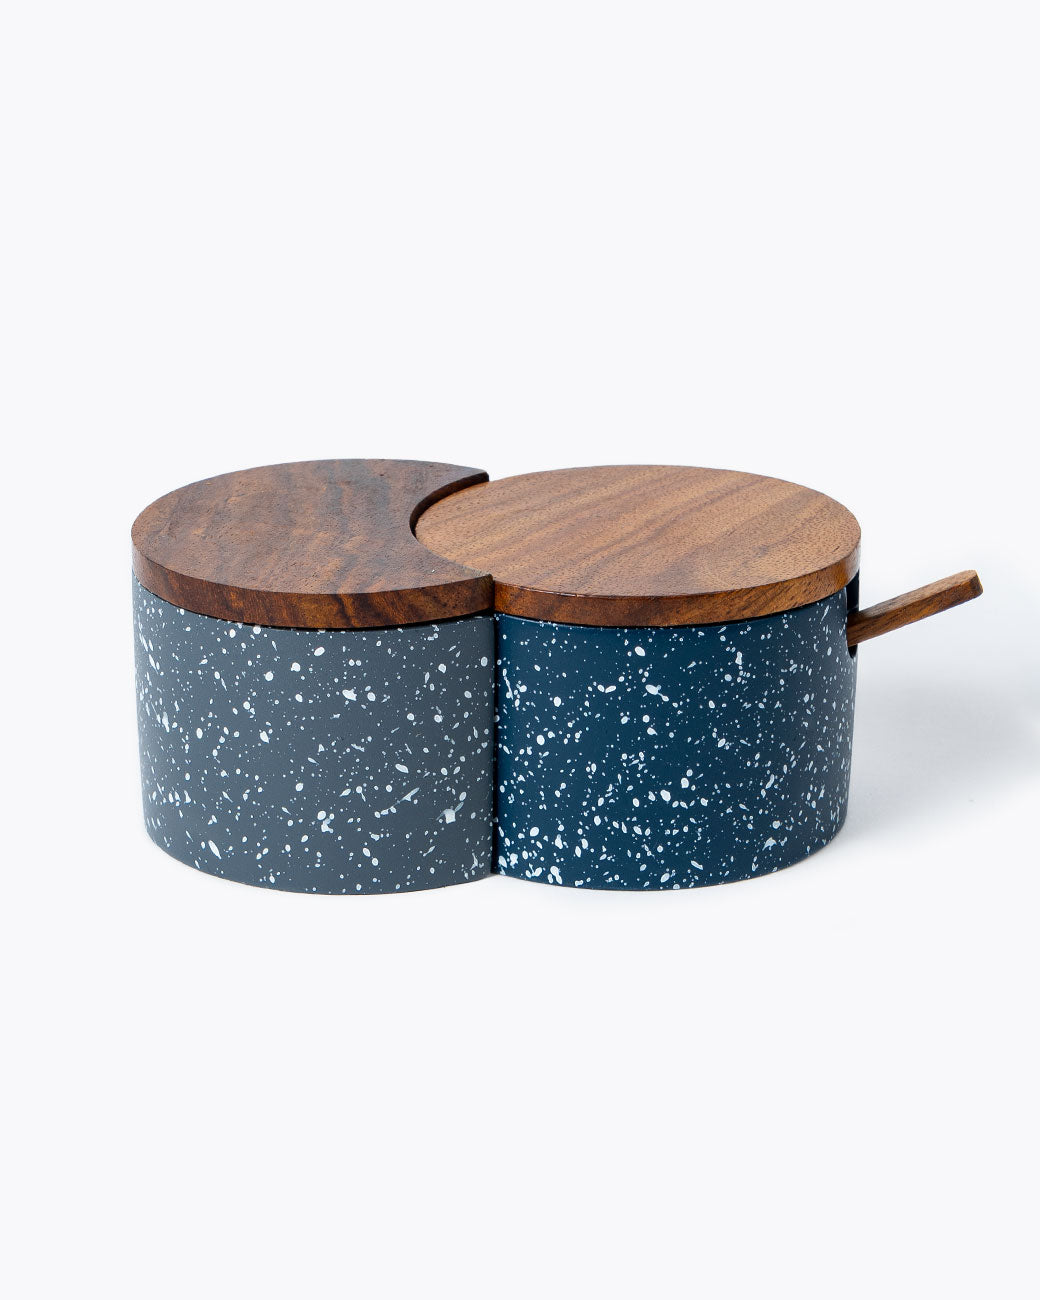 Interlocking circular salt cellar made of speckled blue and gray cement with wood lid and spoon, shown from the side.